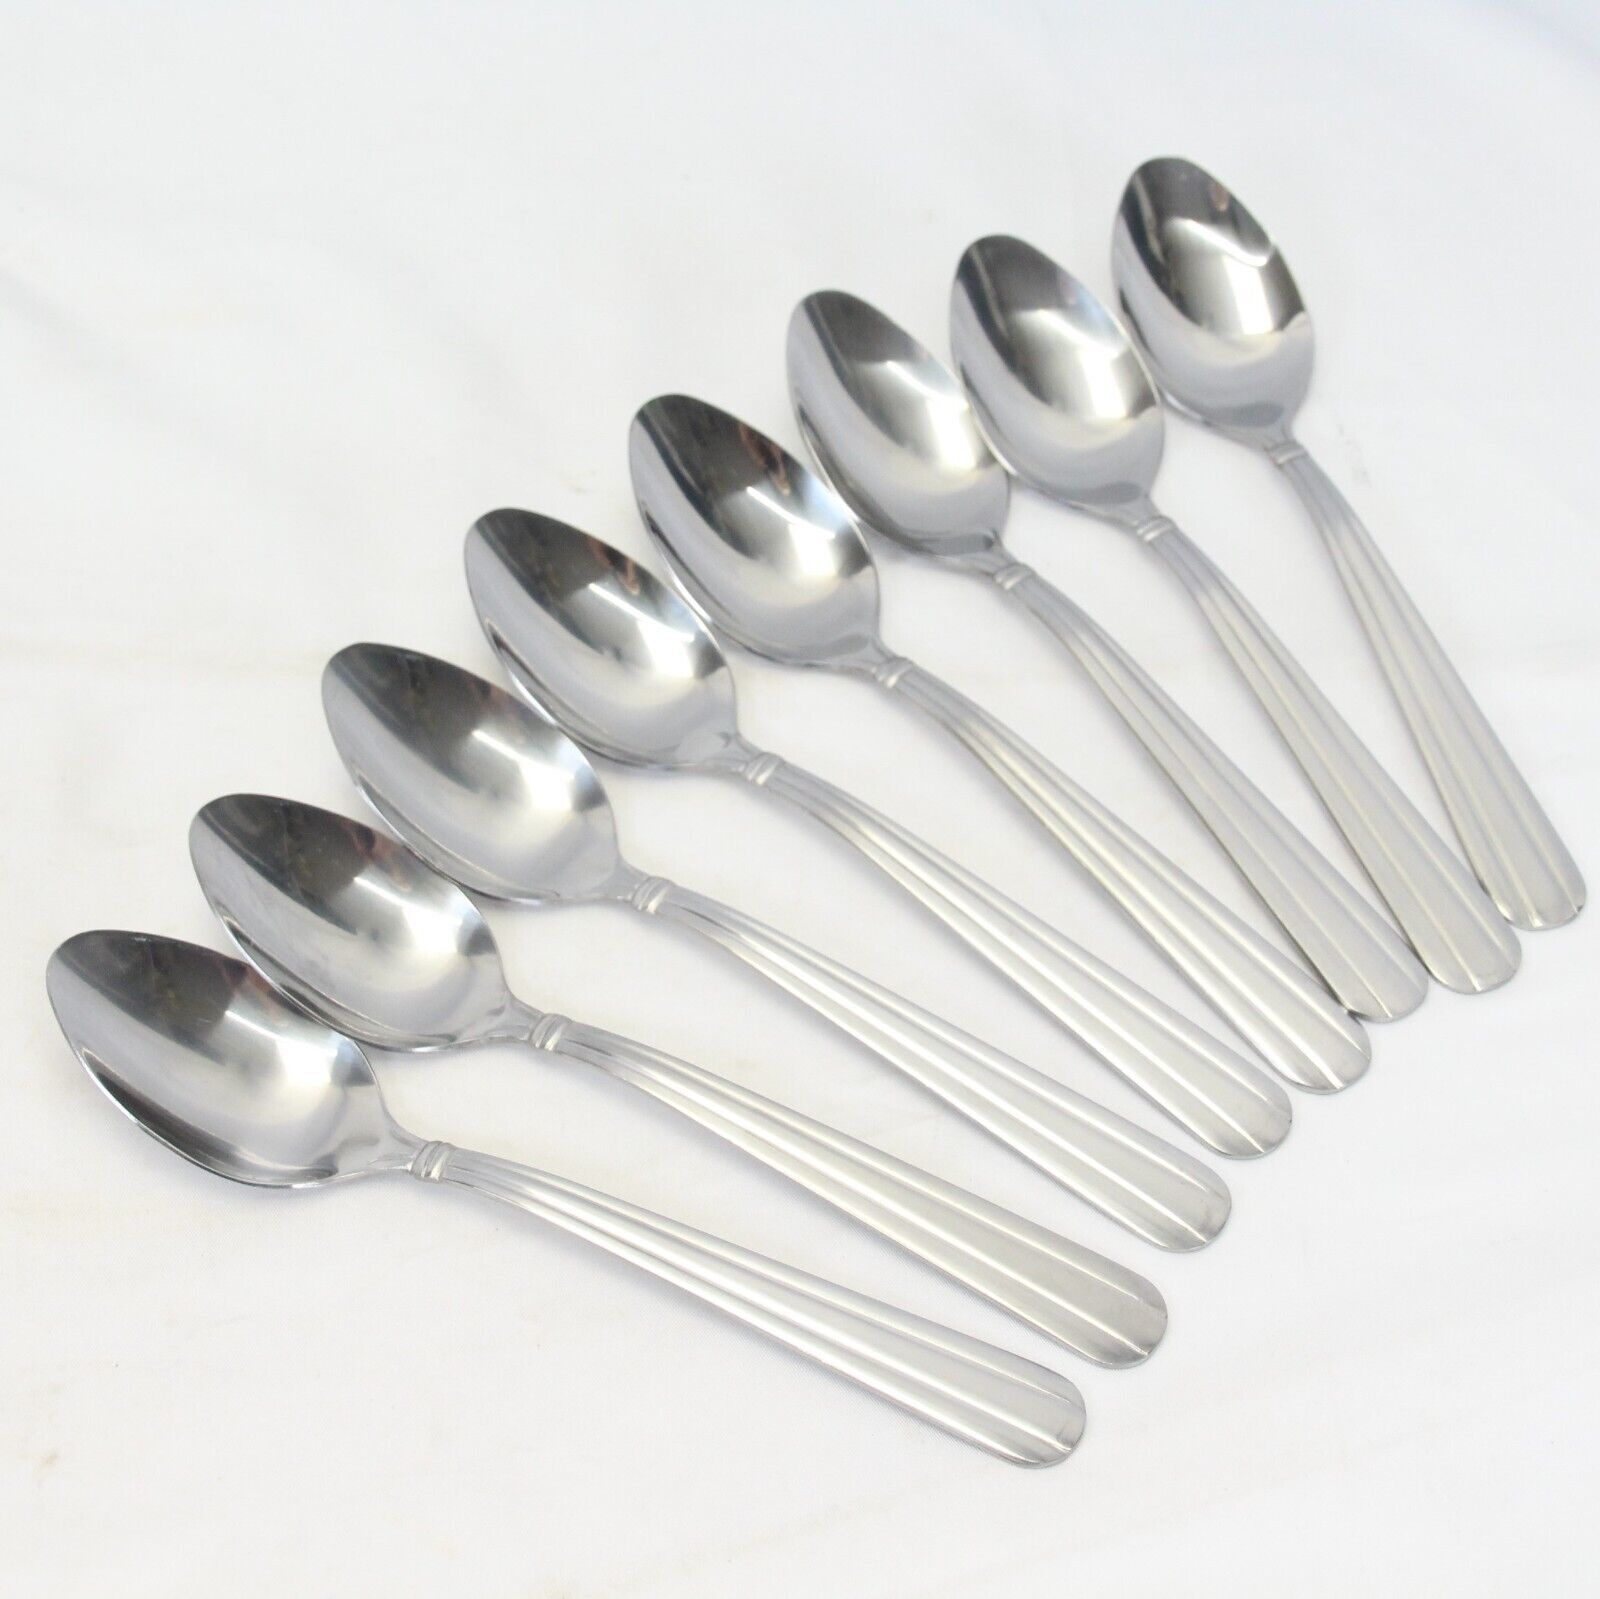  Gibson Scope Duchess Oval Soup Spoons 7.25" Lot of 8 - $35.27